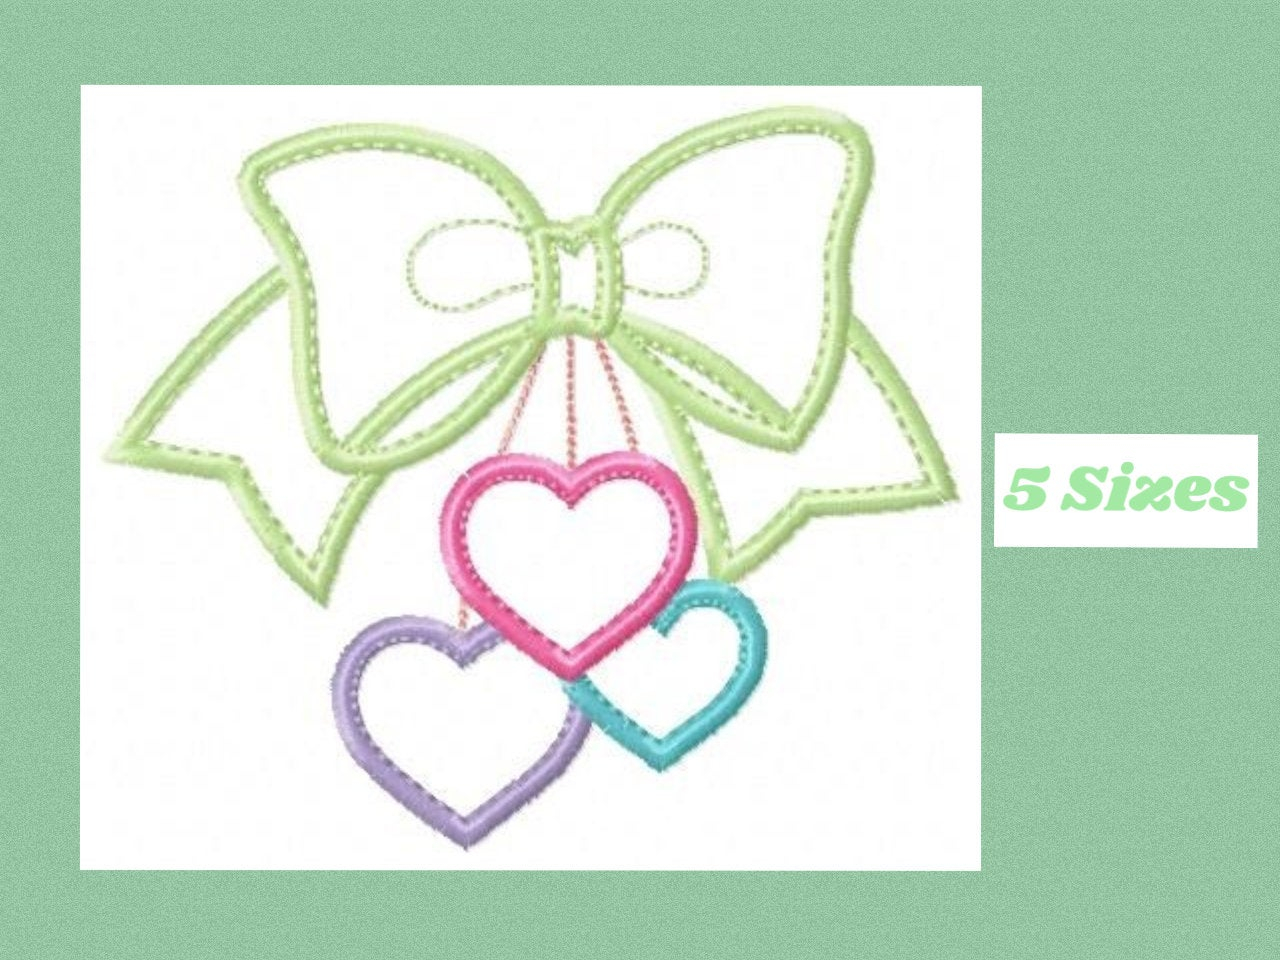 Machine Embroidery Lace Patterns Lace With Hearts Embroidery Designs Bow Tie Embroidery Design Machine Embroidery Pattern Girl Embroidery File Lace Embroidery Lace Applique